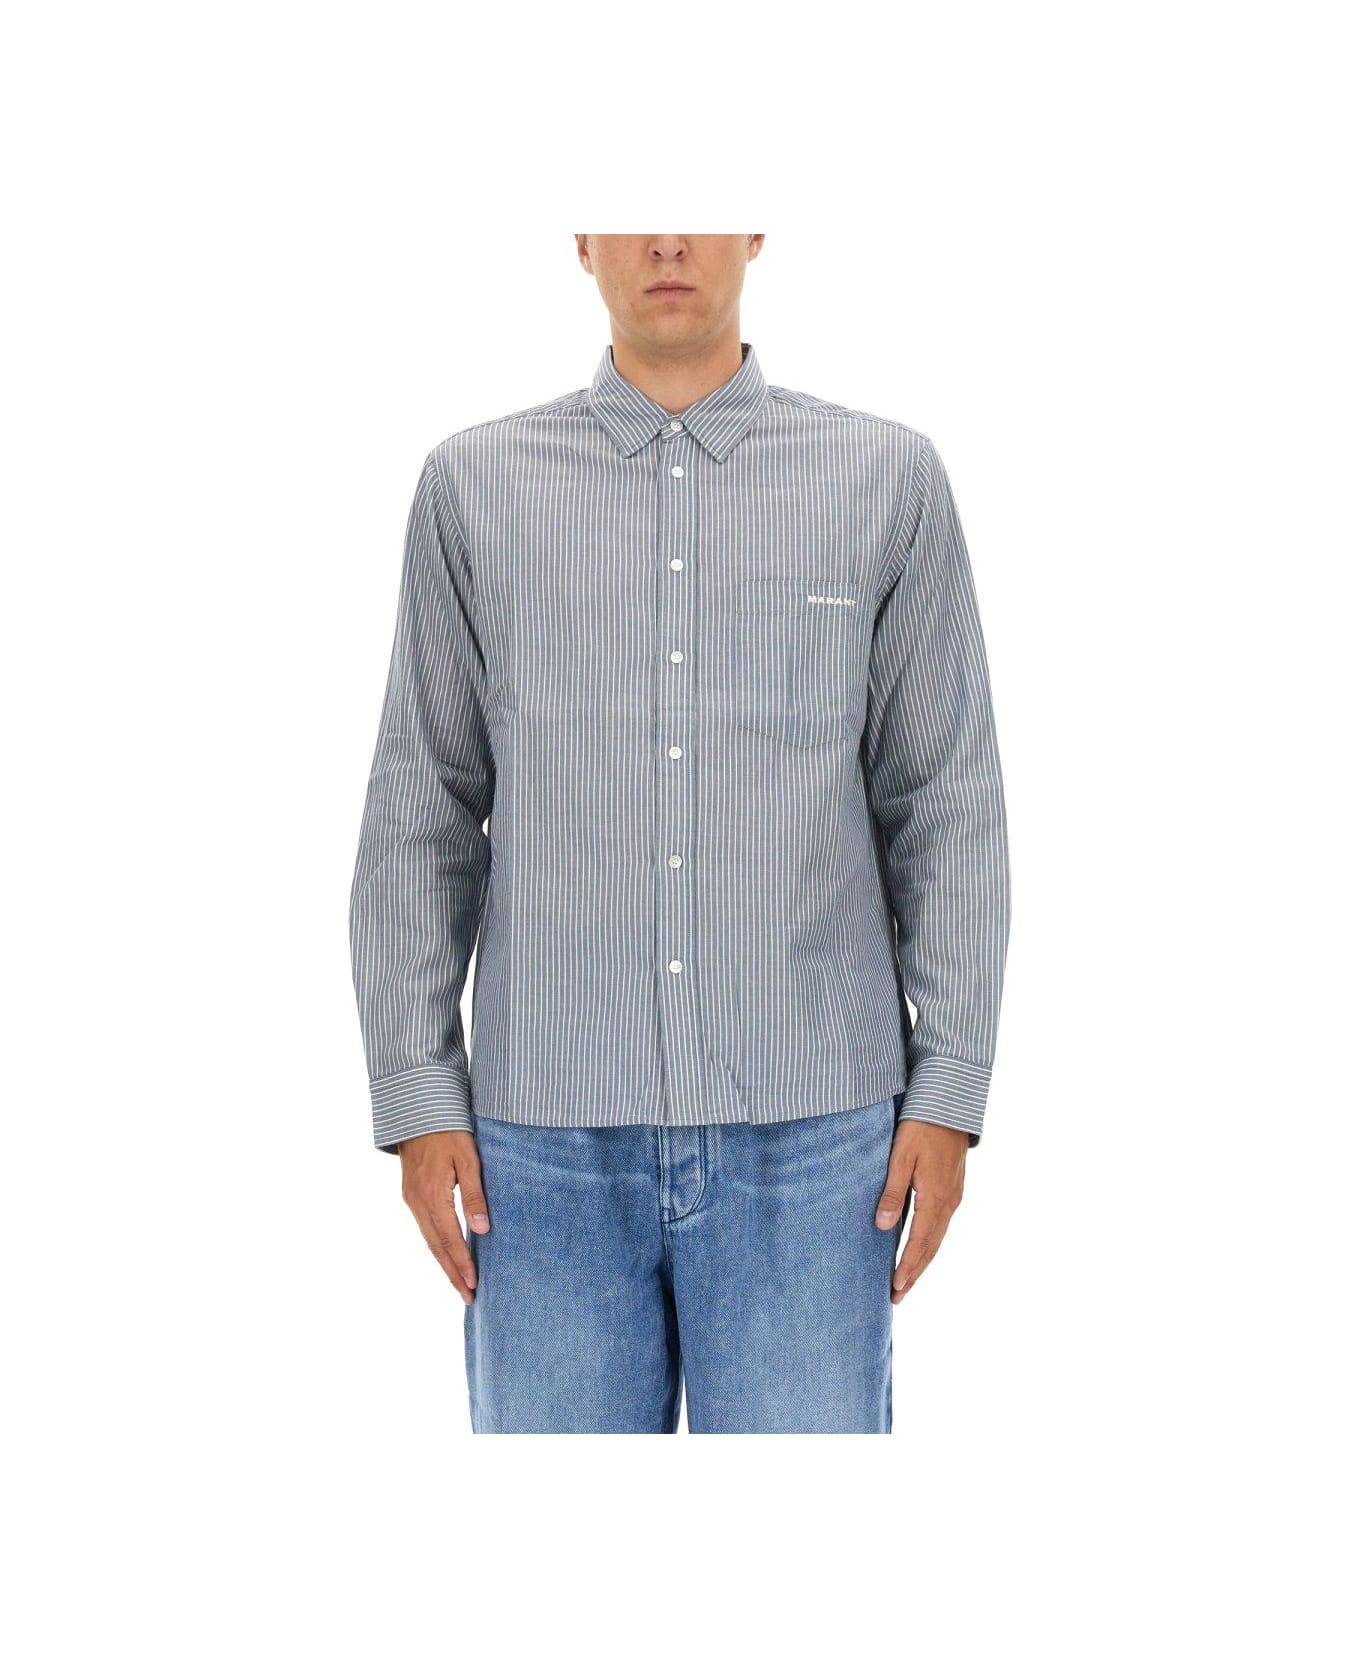 Isabel Marant Striped Button-up Shirt - BLUE シャツ